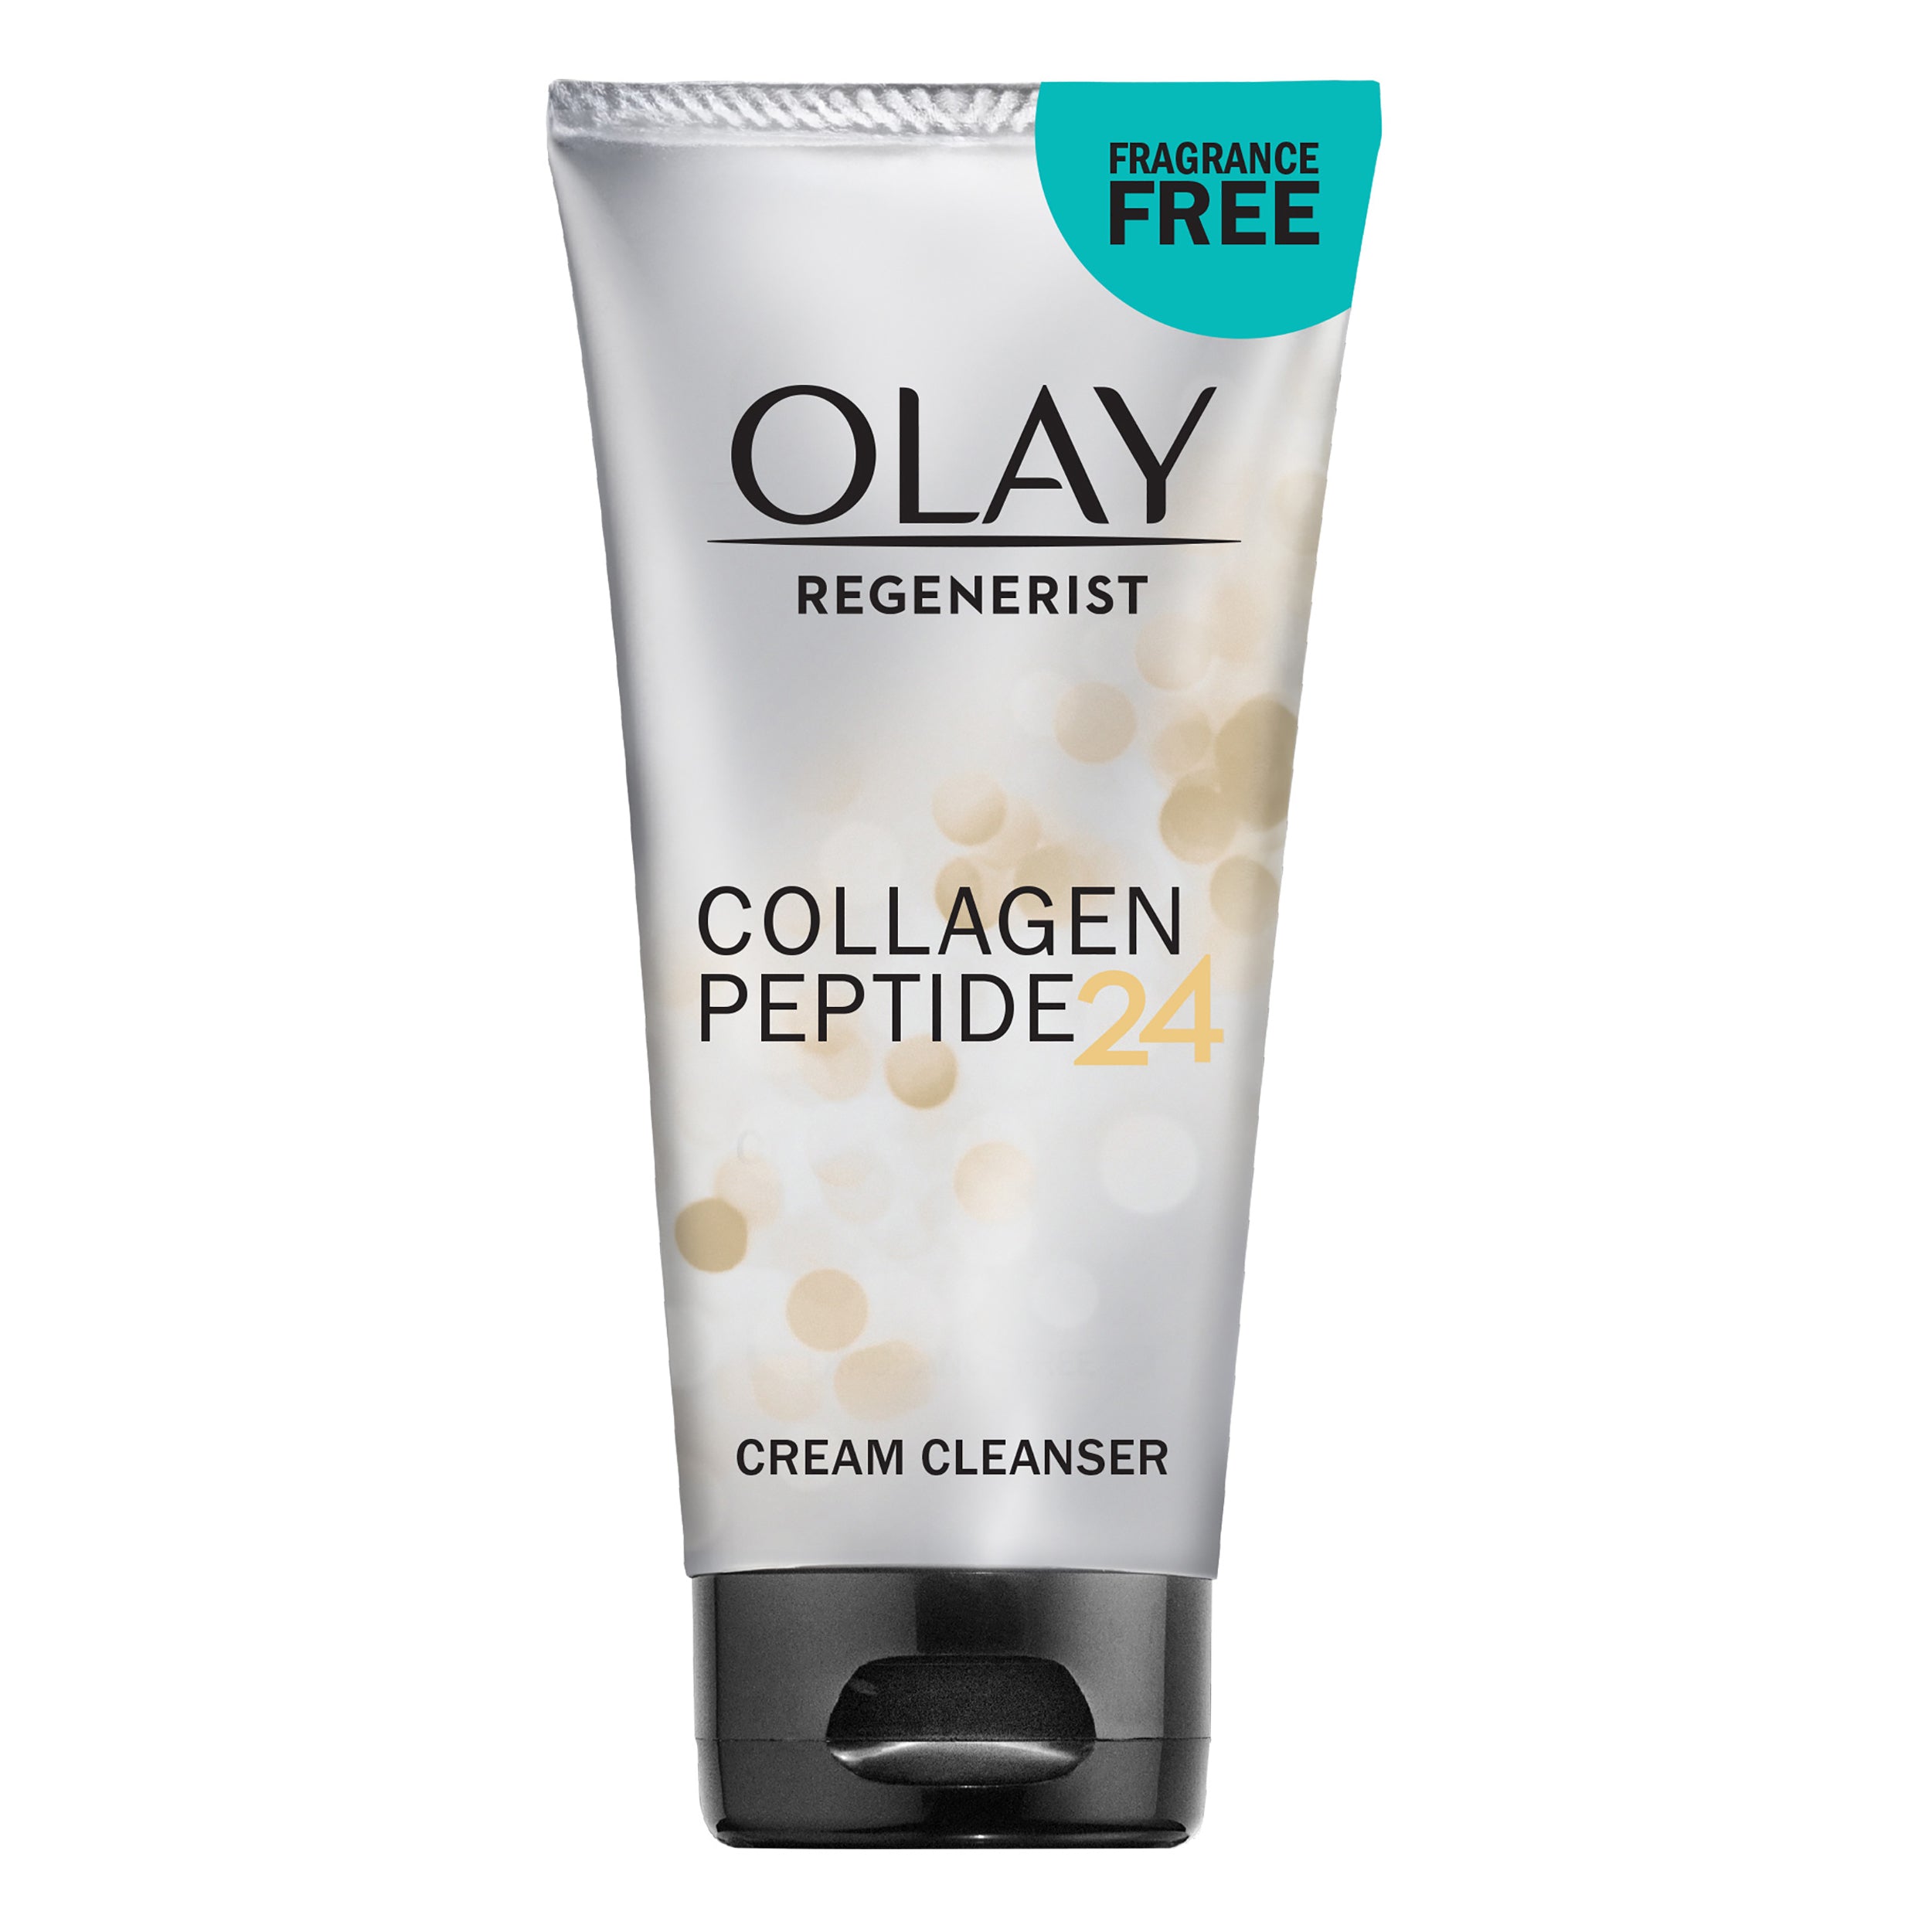 Olay Regenerist Collagen Peptide 24, Face Wash, Fragrance-Free, Soothes Dryness, All Skin, 5.0 fl oz | MTTS325